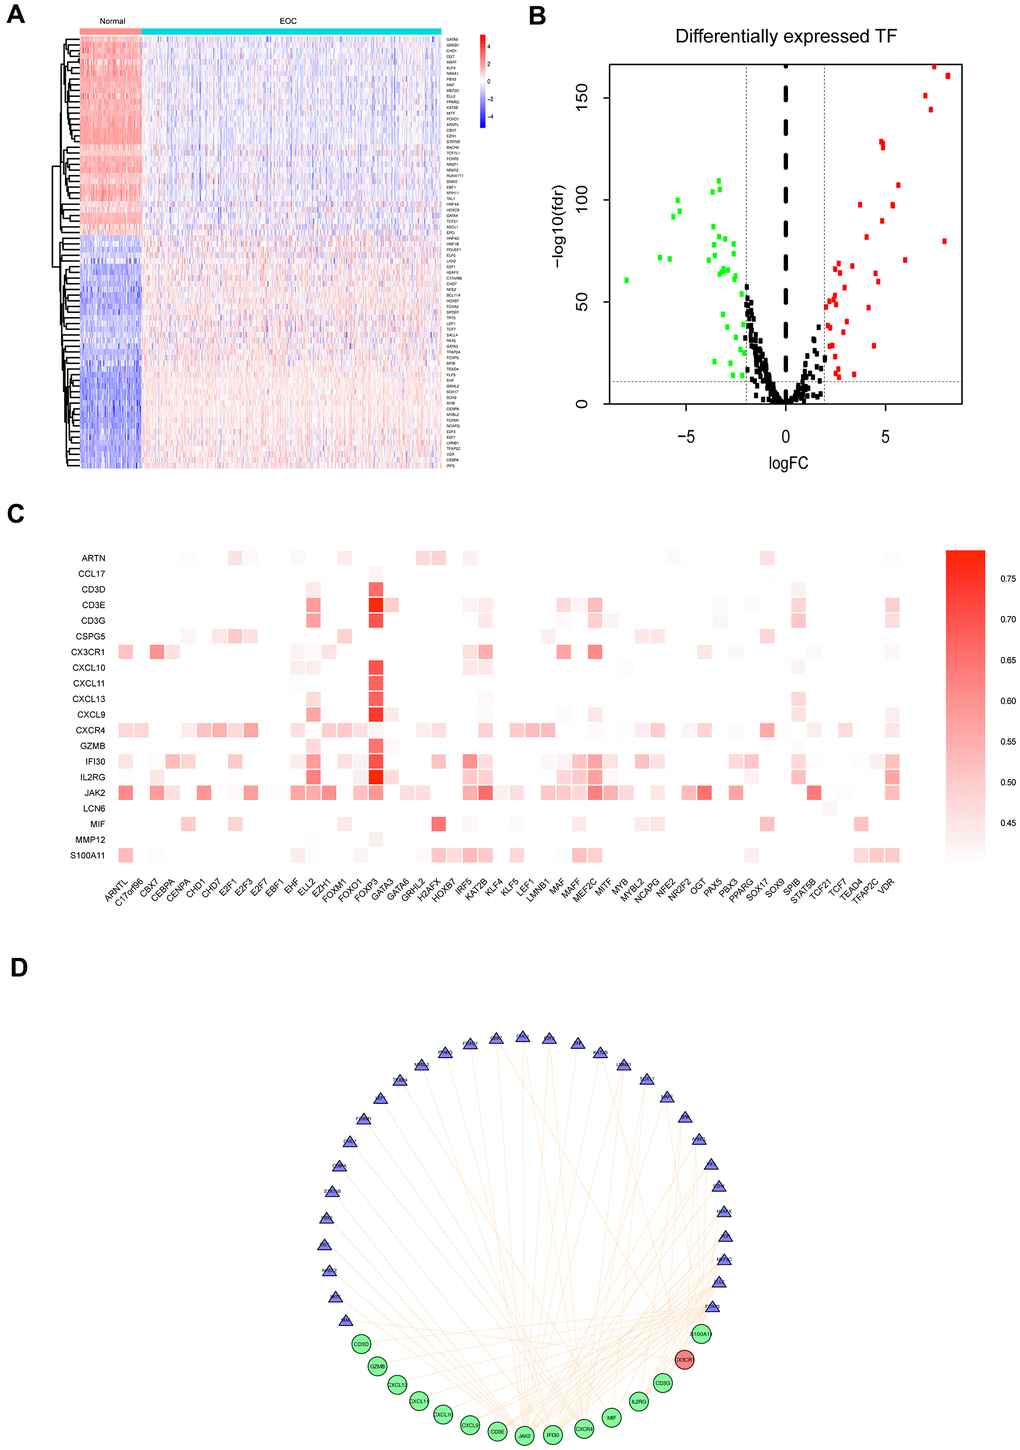 Differentially expressed TFs in EOC, and transcriptional regulatory network constructed of TFs for prognostic IRGs. (A) Heatmap of significantly differentially expressed TFs in EOC. (B) Volcano plot of differentially expressed TFs. (C) Correlations between differentially expressed TFs and 23 prognostic IRGs (PD) Regulatory network of TFs and the main prognostic IRGs (correlation coefficient >0.5 and P